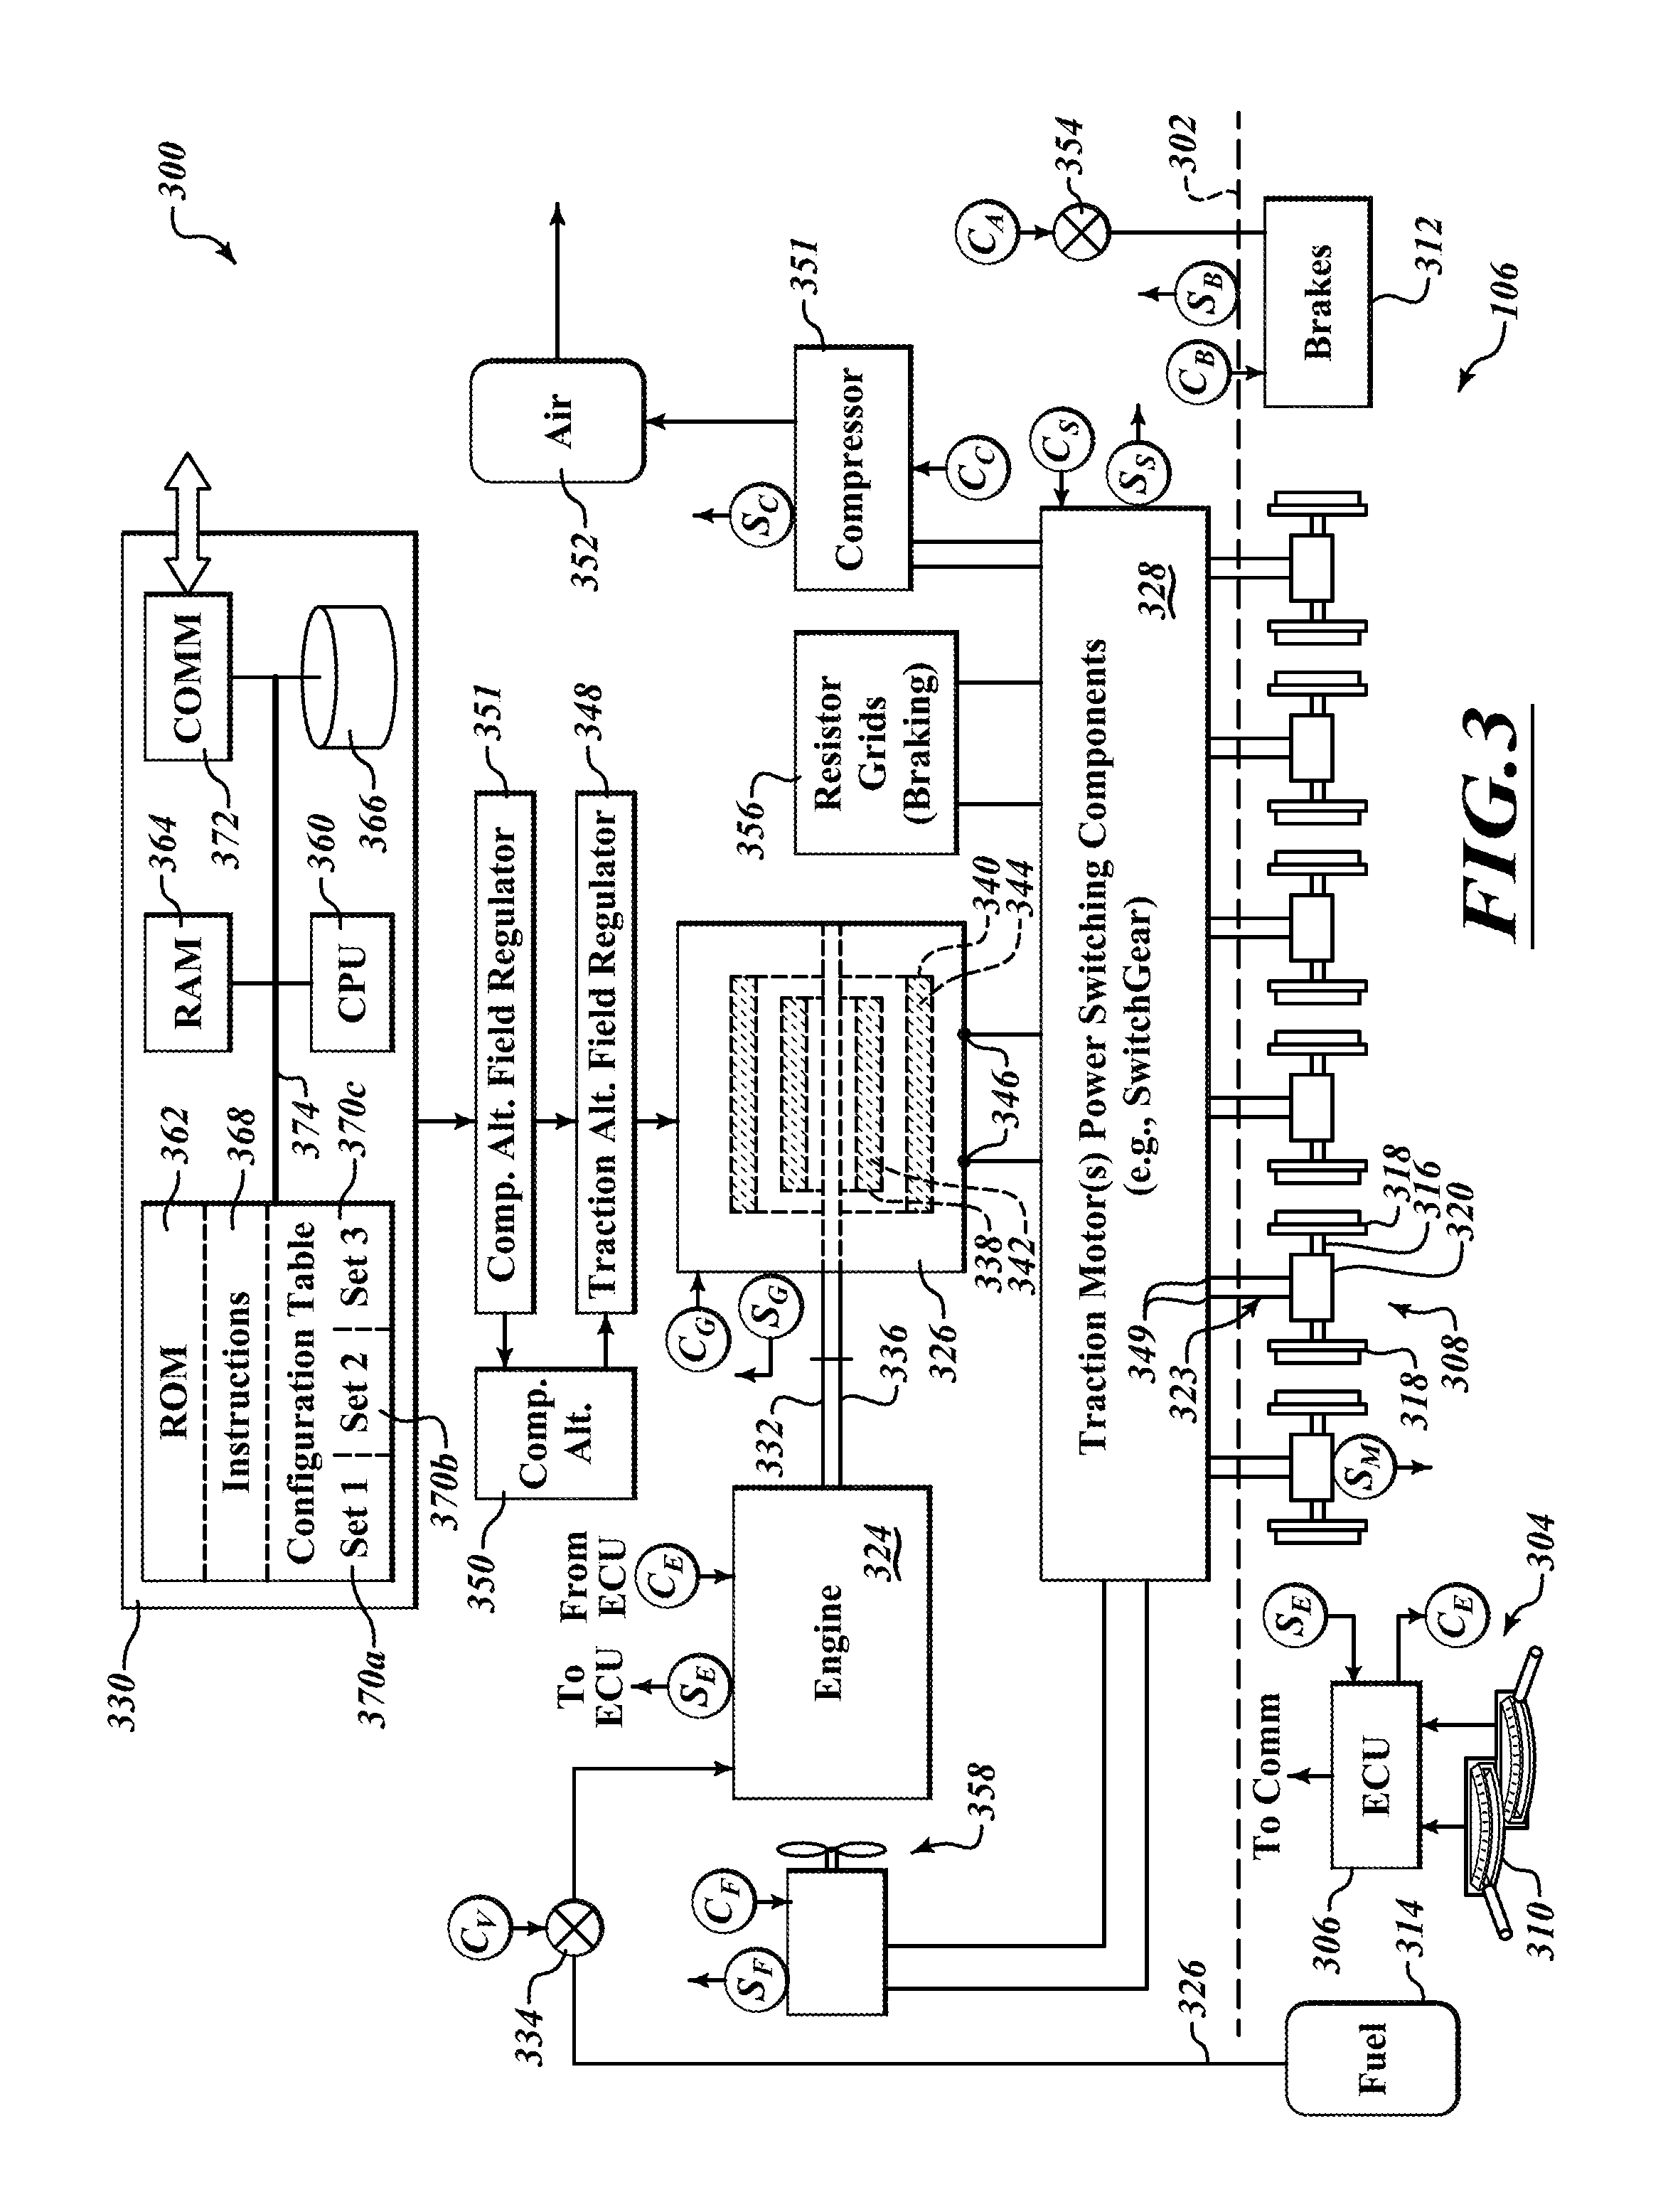 Apparatus and method for power production, control, and/or telematics, suitable for use with locomotives